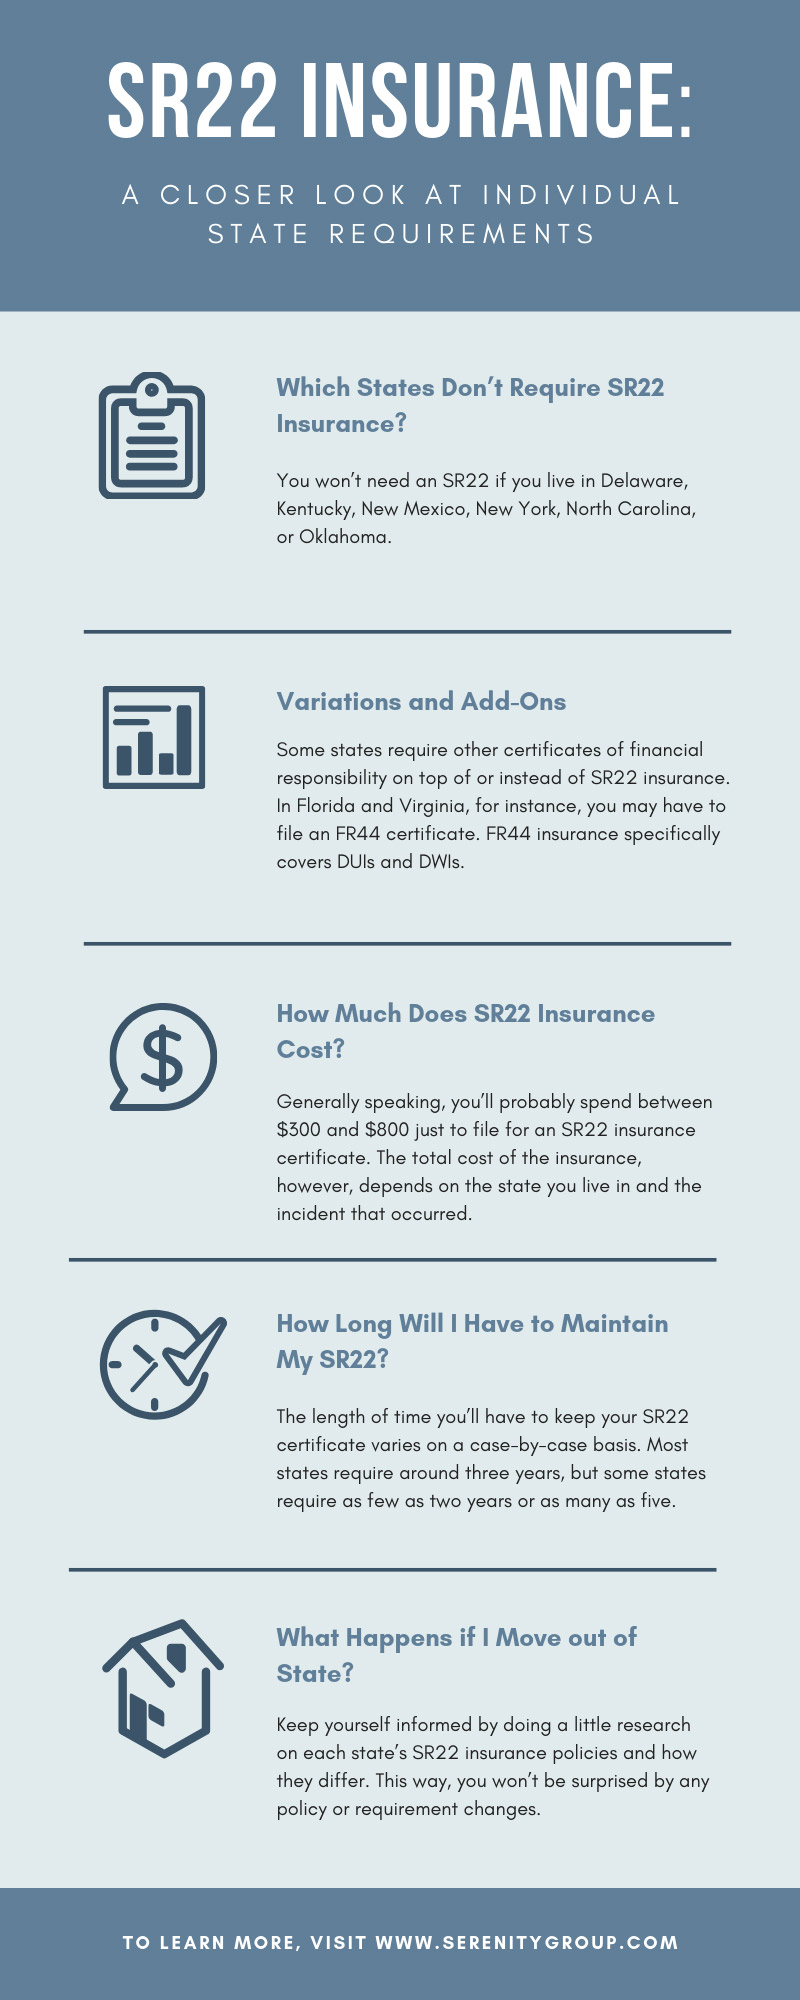 SR22 Insurance: A Closer Look at Individual State Requirements infographic